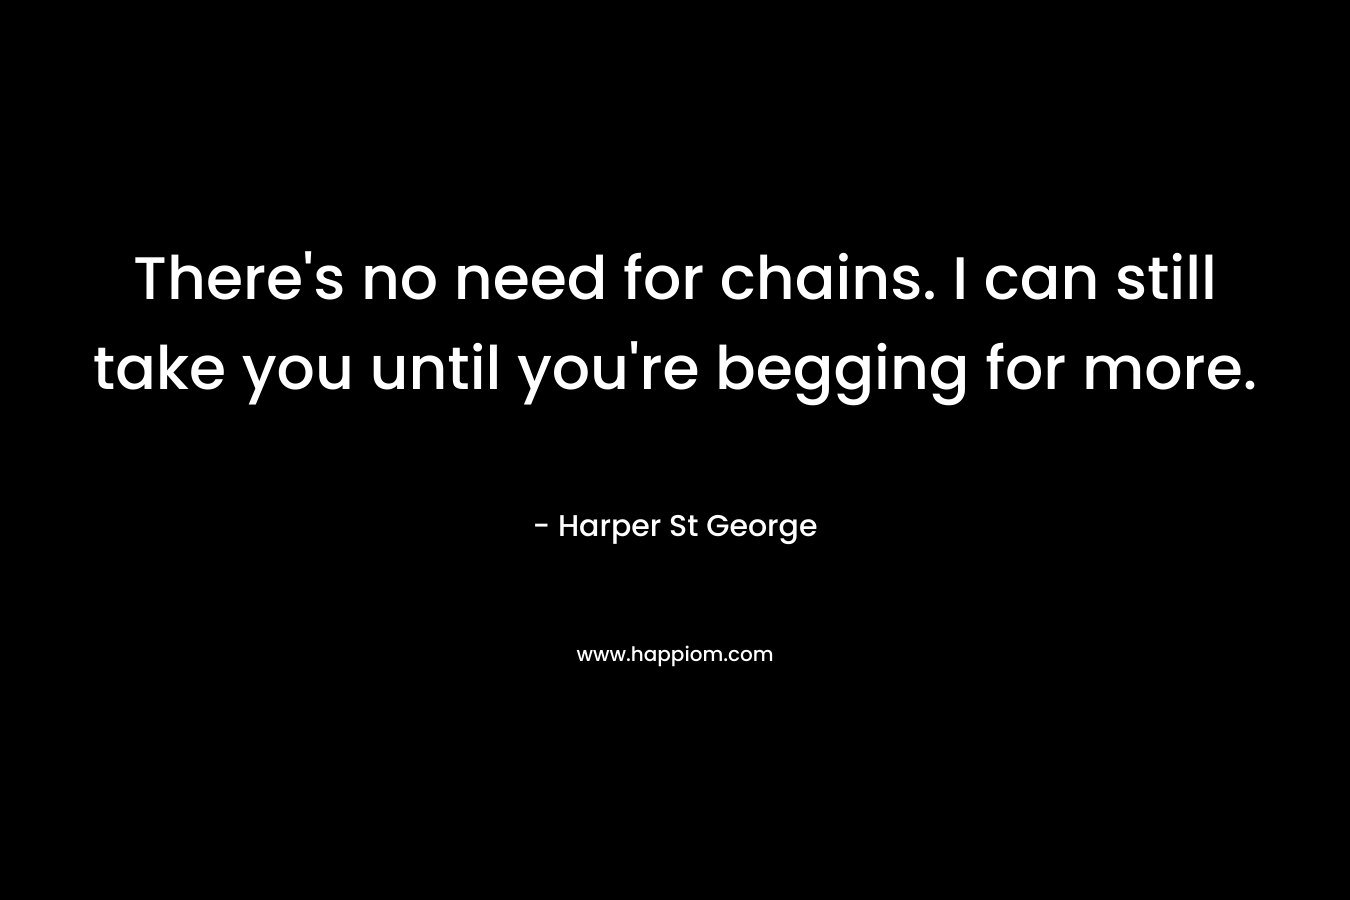 There’s no need for chains. I can still take you until you’re begging for more. – Harper St George